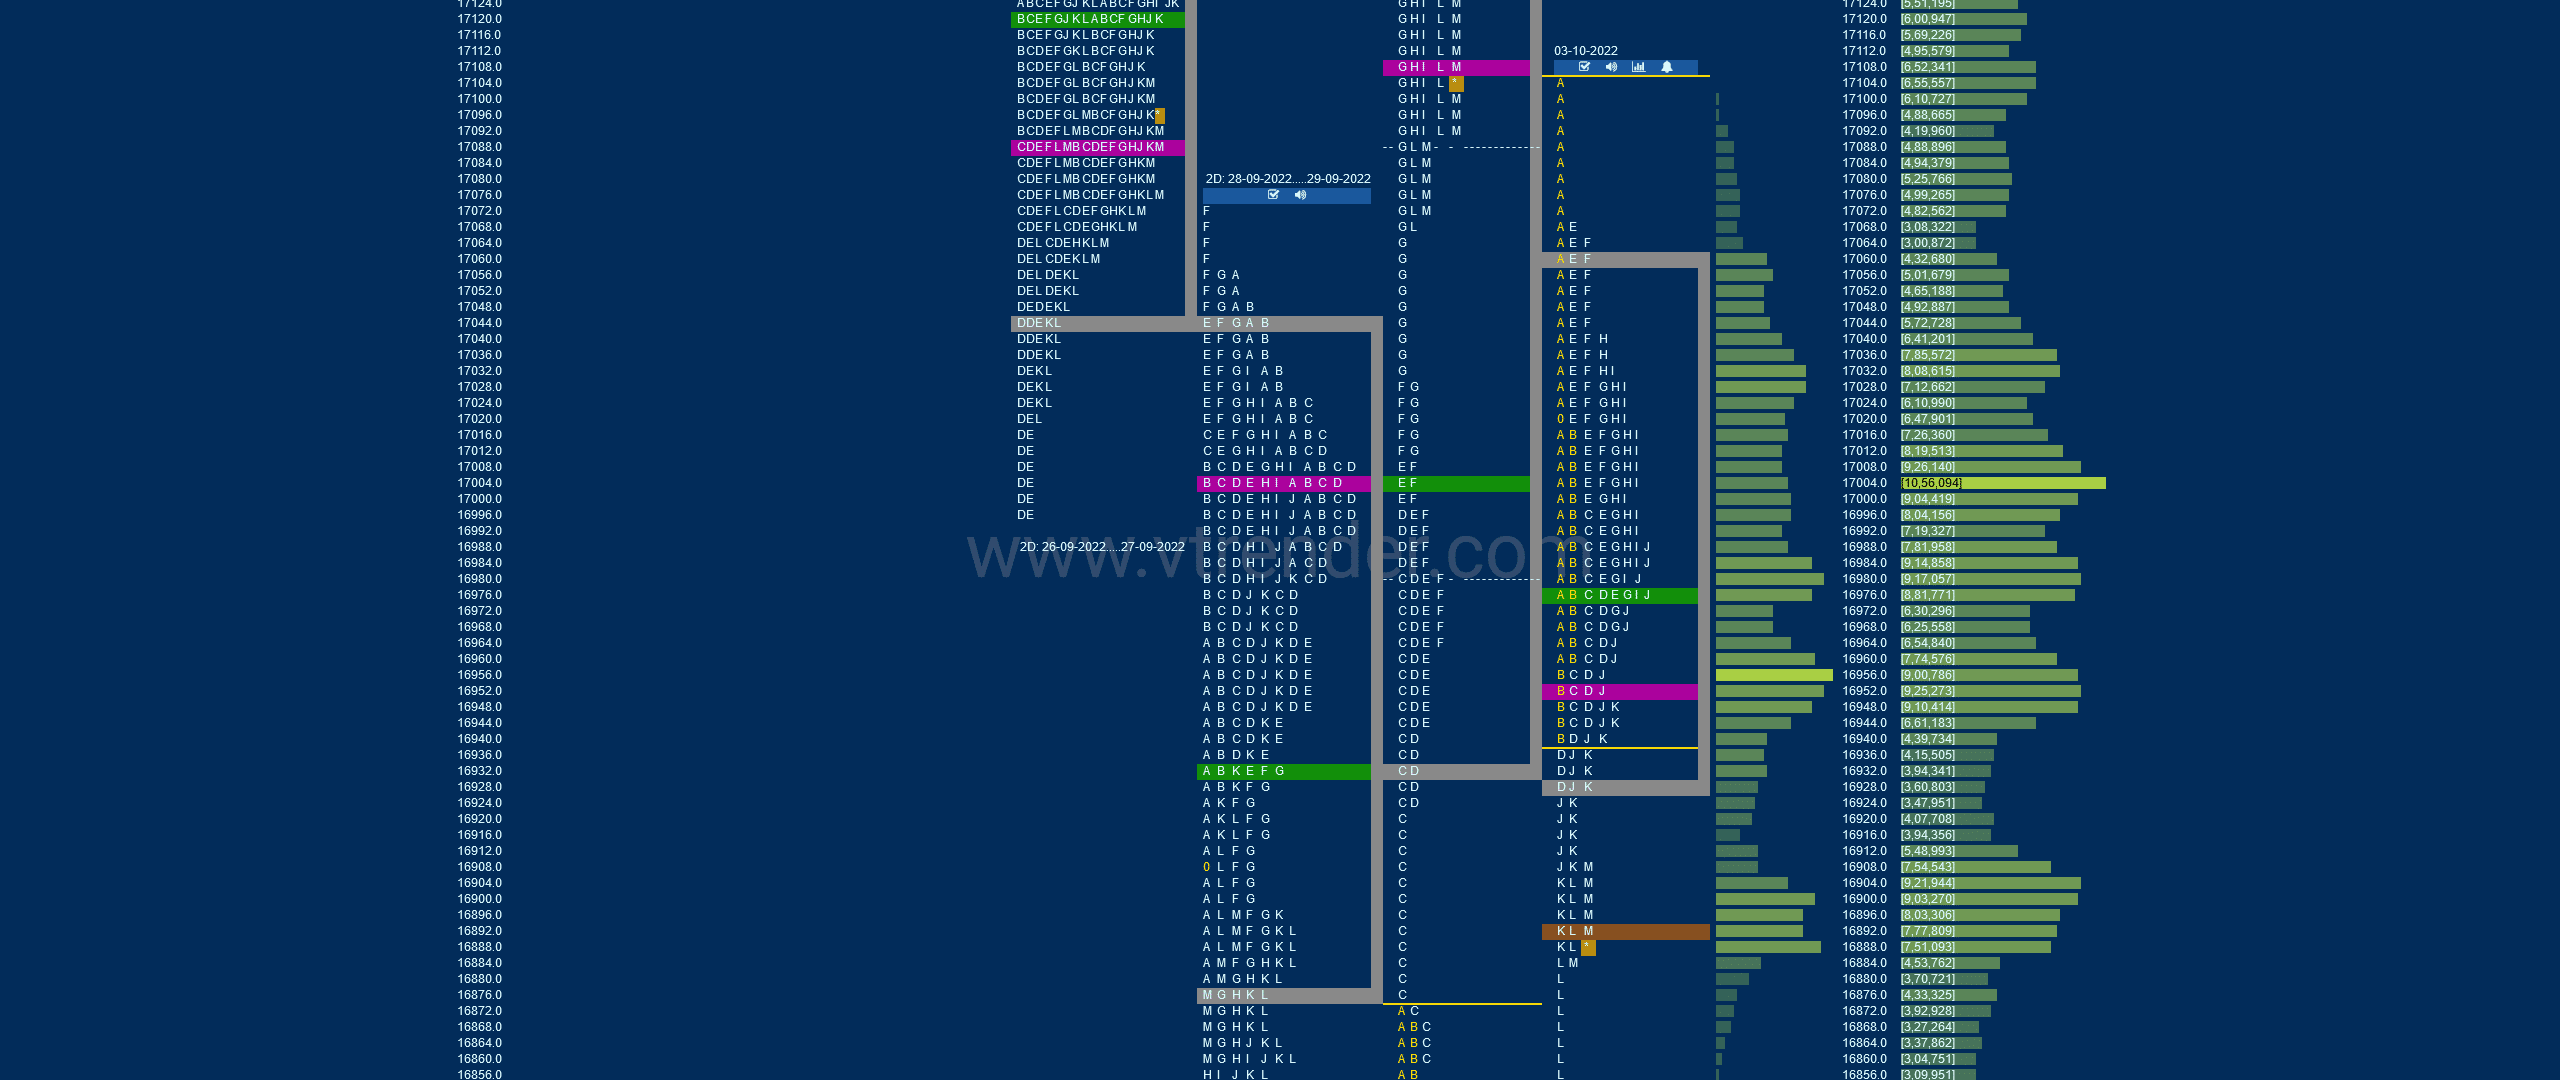 Nf 1 Market Profile Analysis Dated 03Rd Oct 2022 Banknifty Futures, Charts, Day Trading, Intraday Trading, Intraday Trading Strategies, Market Profile, Market Profile Trading Strategies, Nifty Futures, Order Flow Analysis, Support And Resistance, Technical Analysis, Trading Strategies, Volume Profile Trading